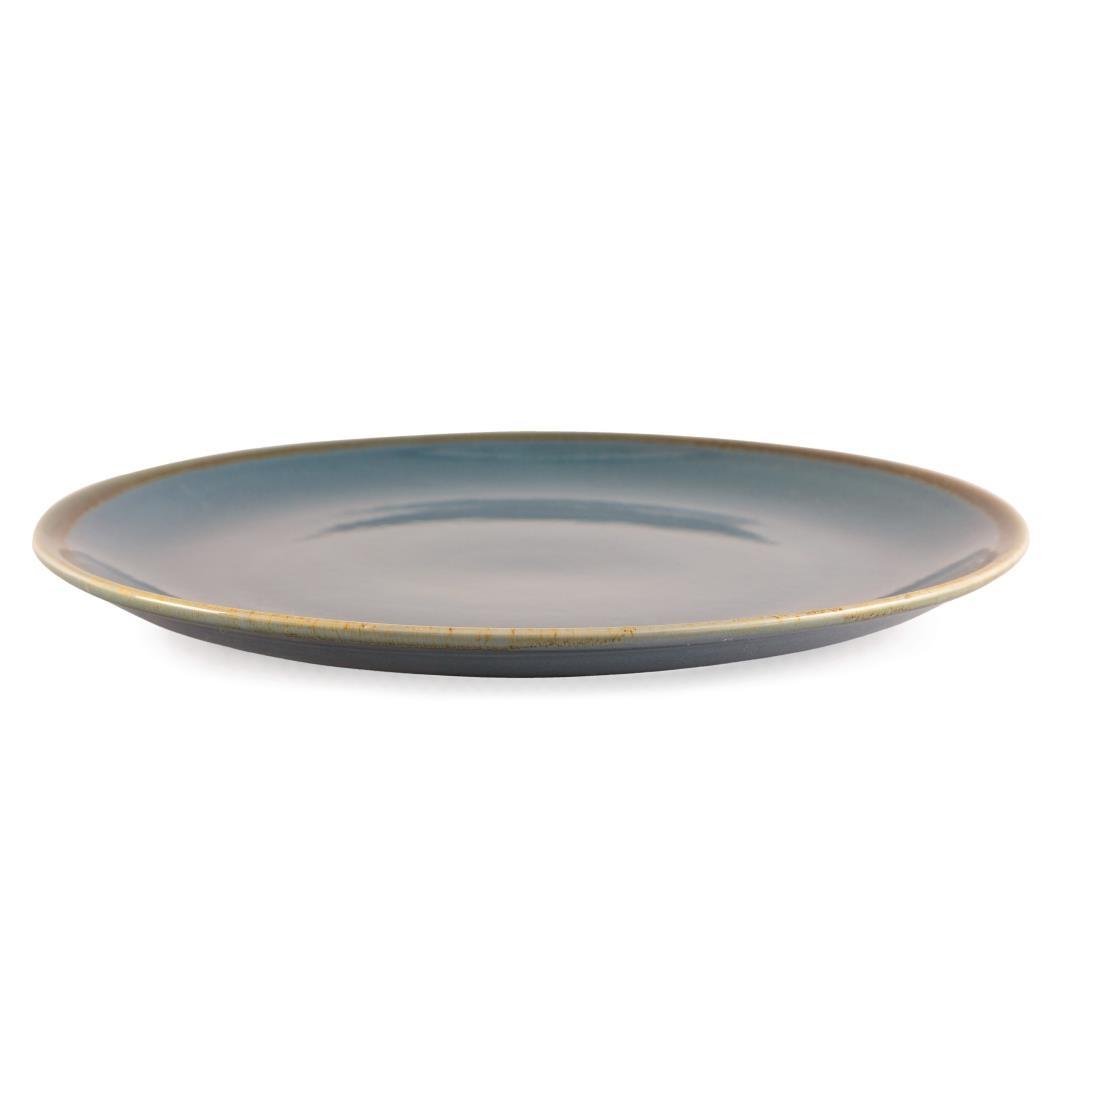 Olympia Kiln Round Plates Ocean 280mm (Pack of 4) - GP465  - 4